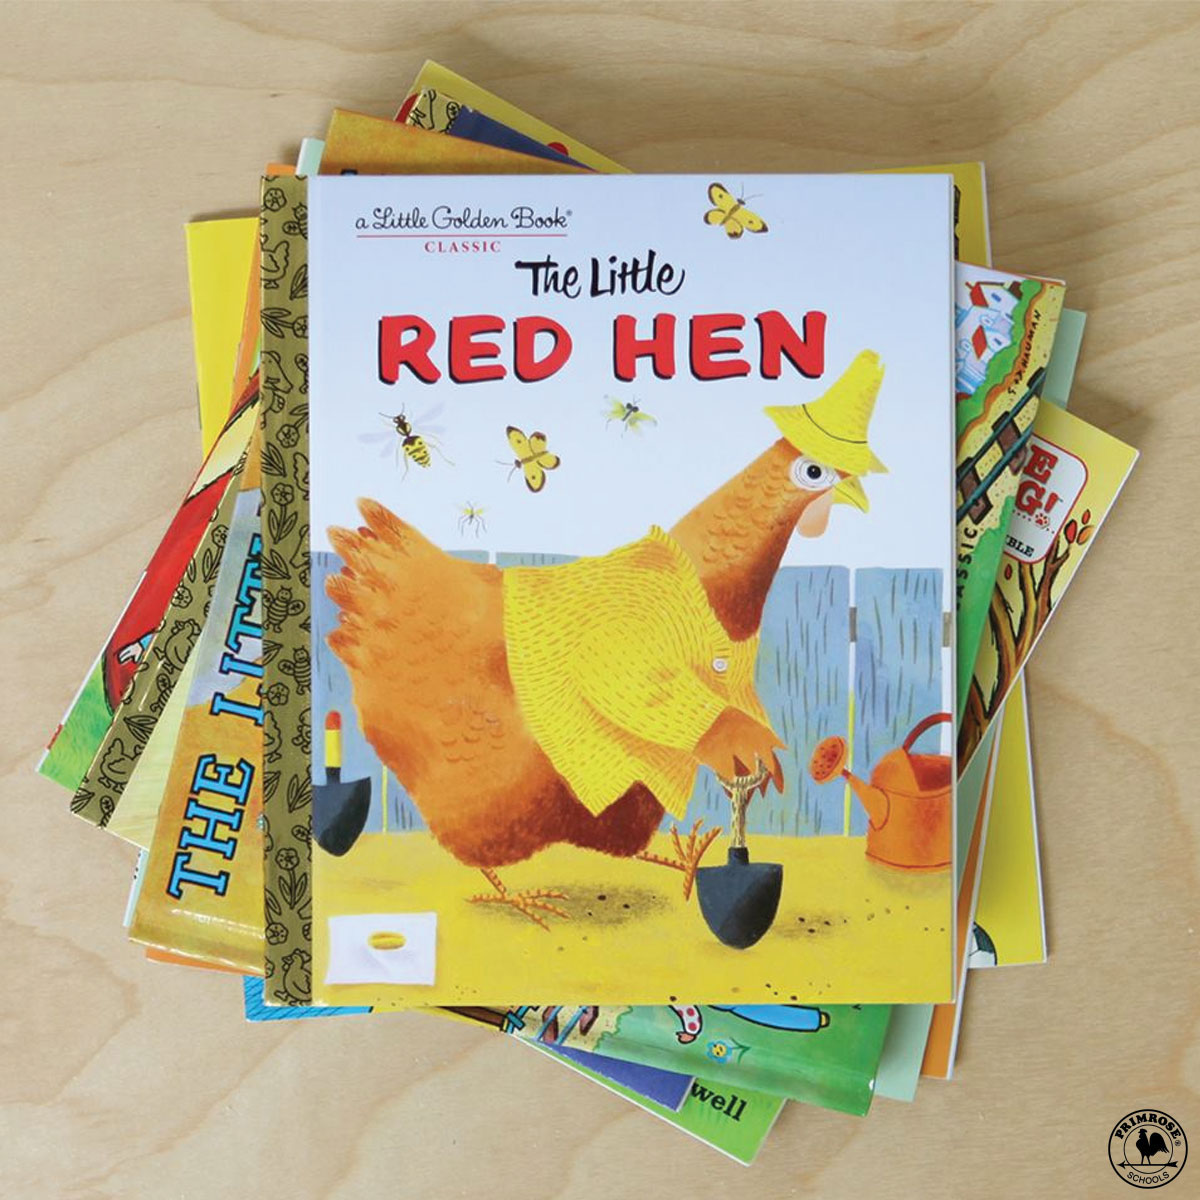 The Little Red Hen story book placed on top of a pile of other book